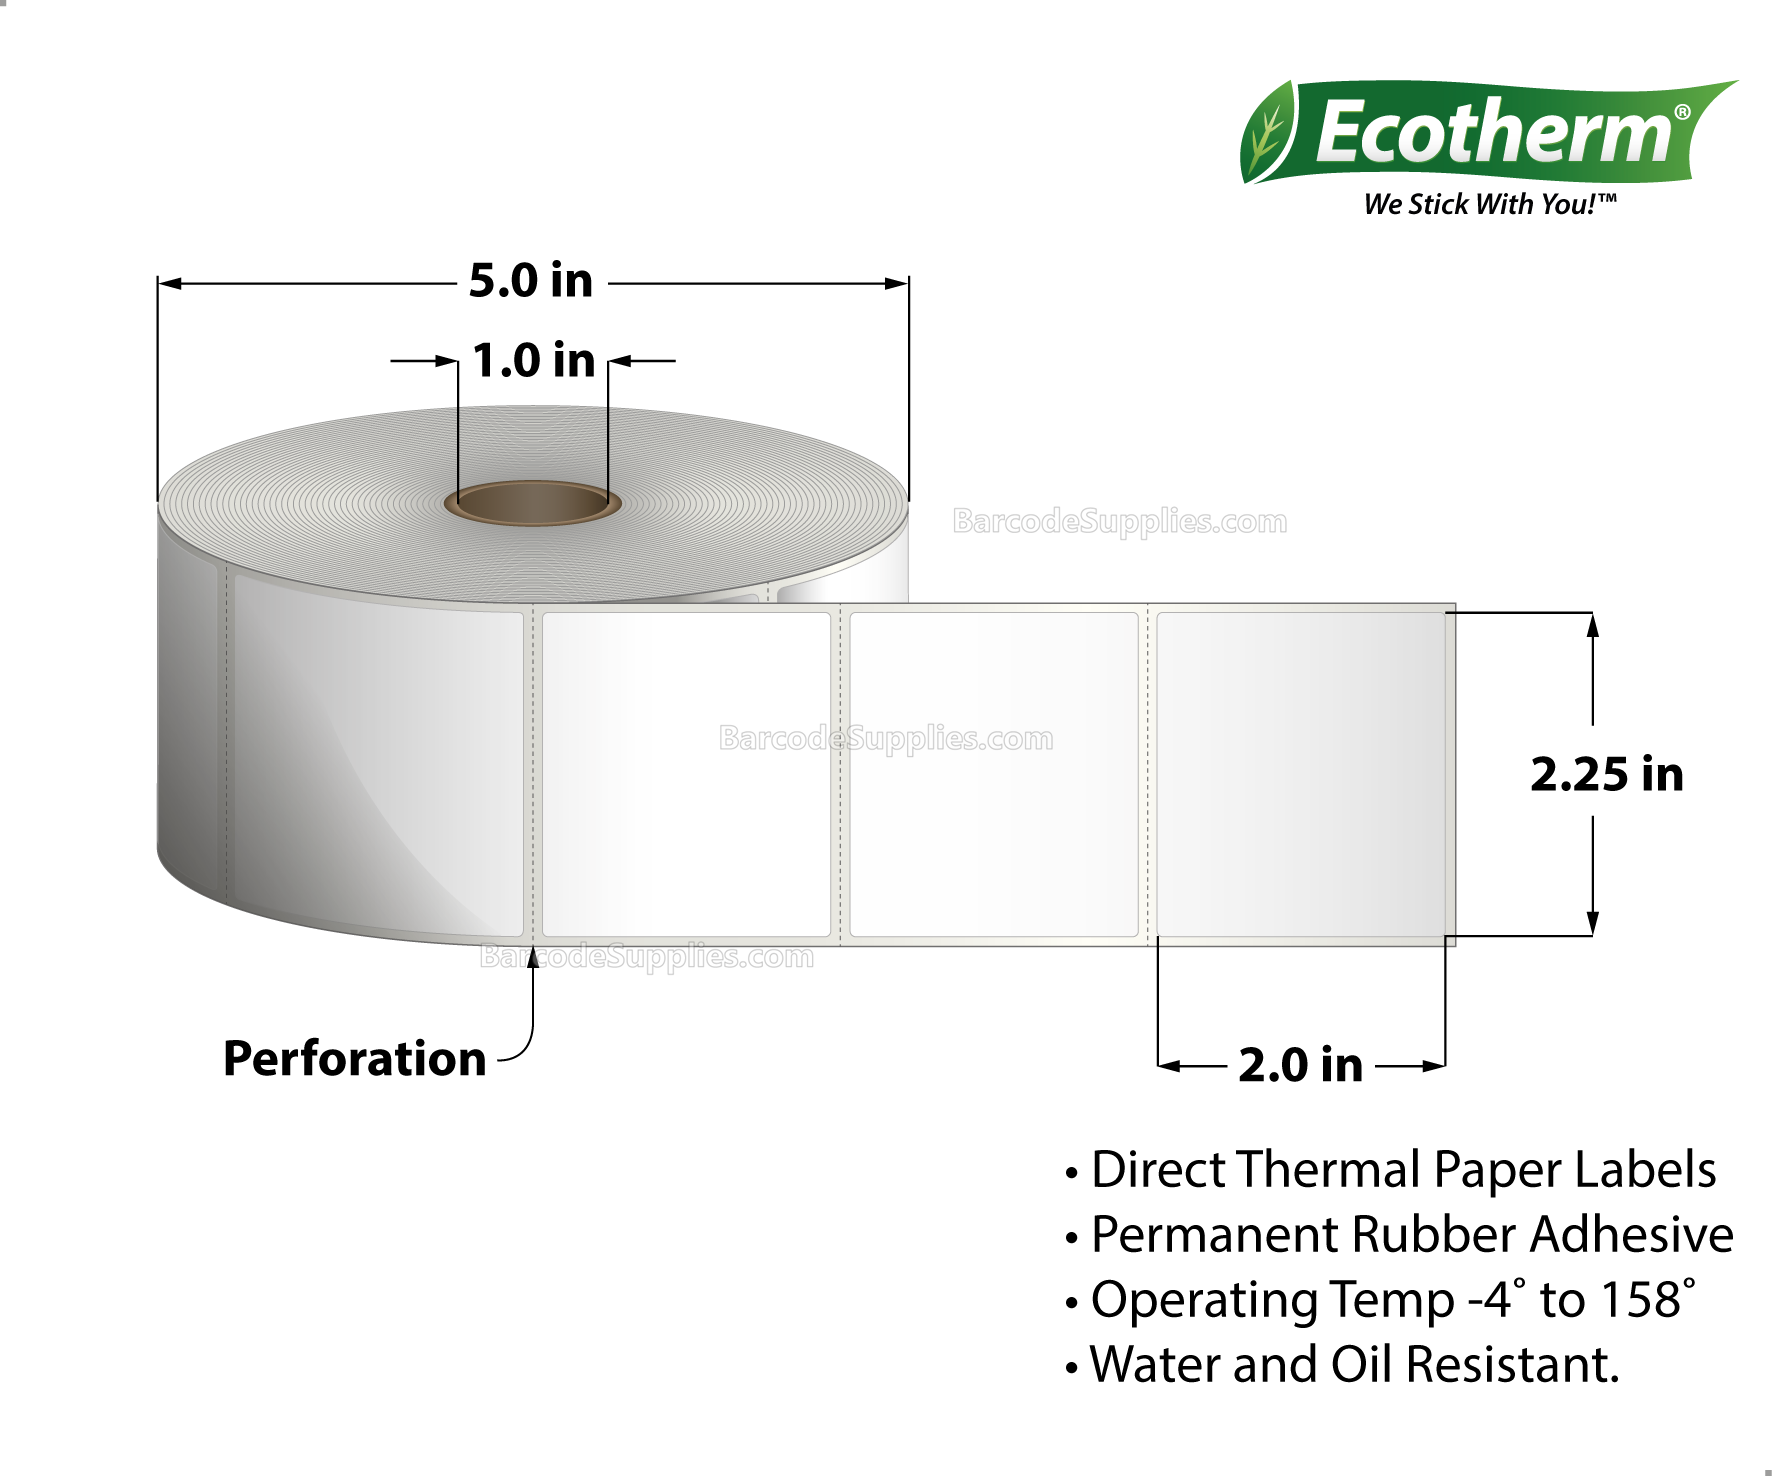 2.25 x 2 Direct Thermal White Labels With Rubber Adhesive - Perforated - 1370 Labels Per Roll - Carton Of 6 Rolls - 8220 Labels Total - MPN: ECOTHERM15128-6